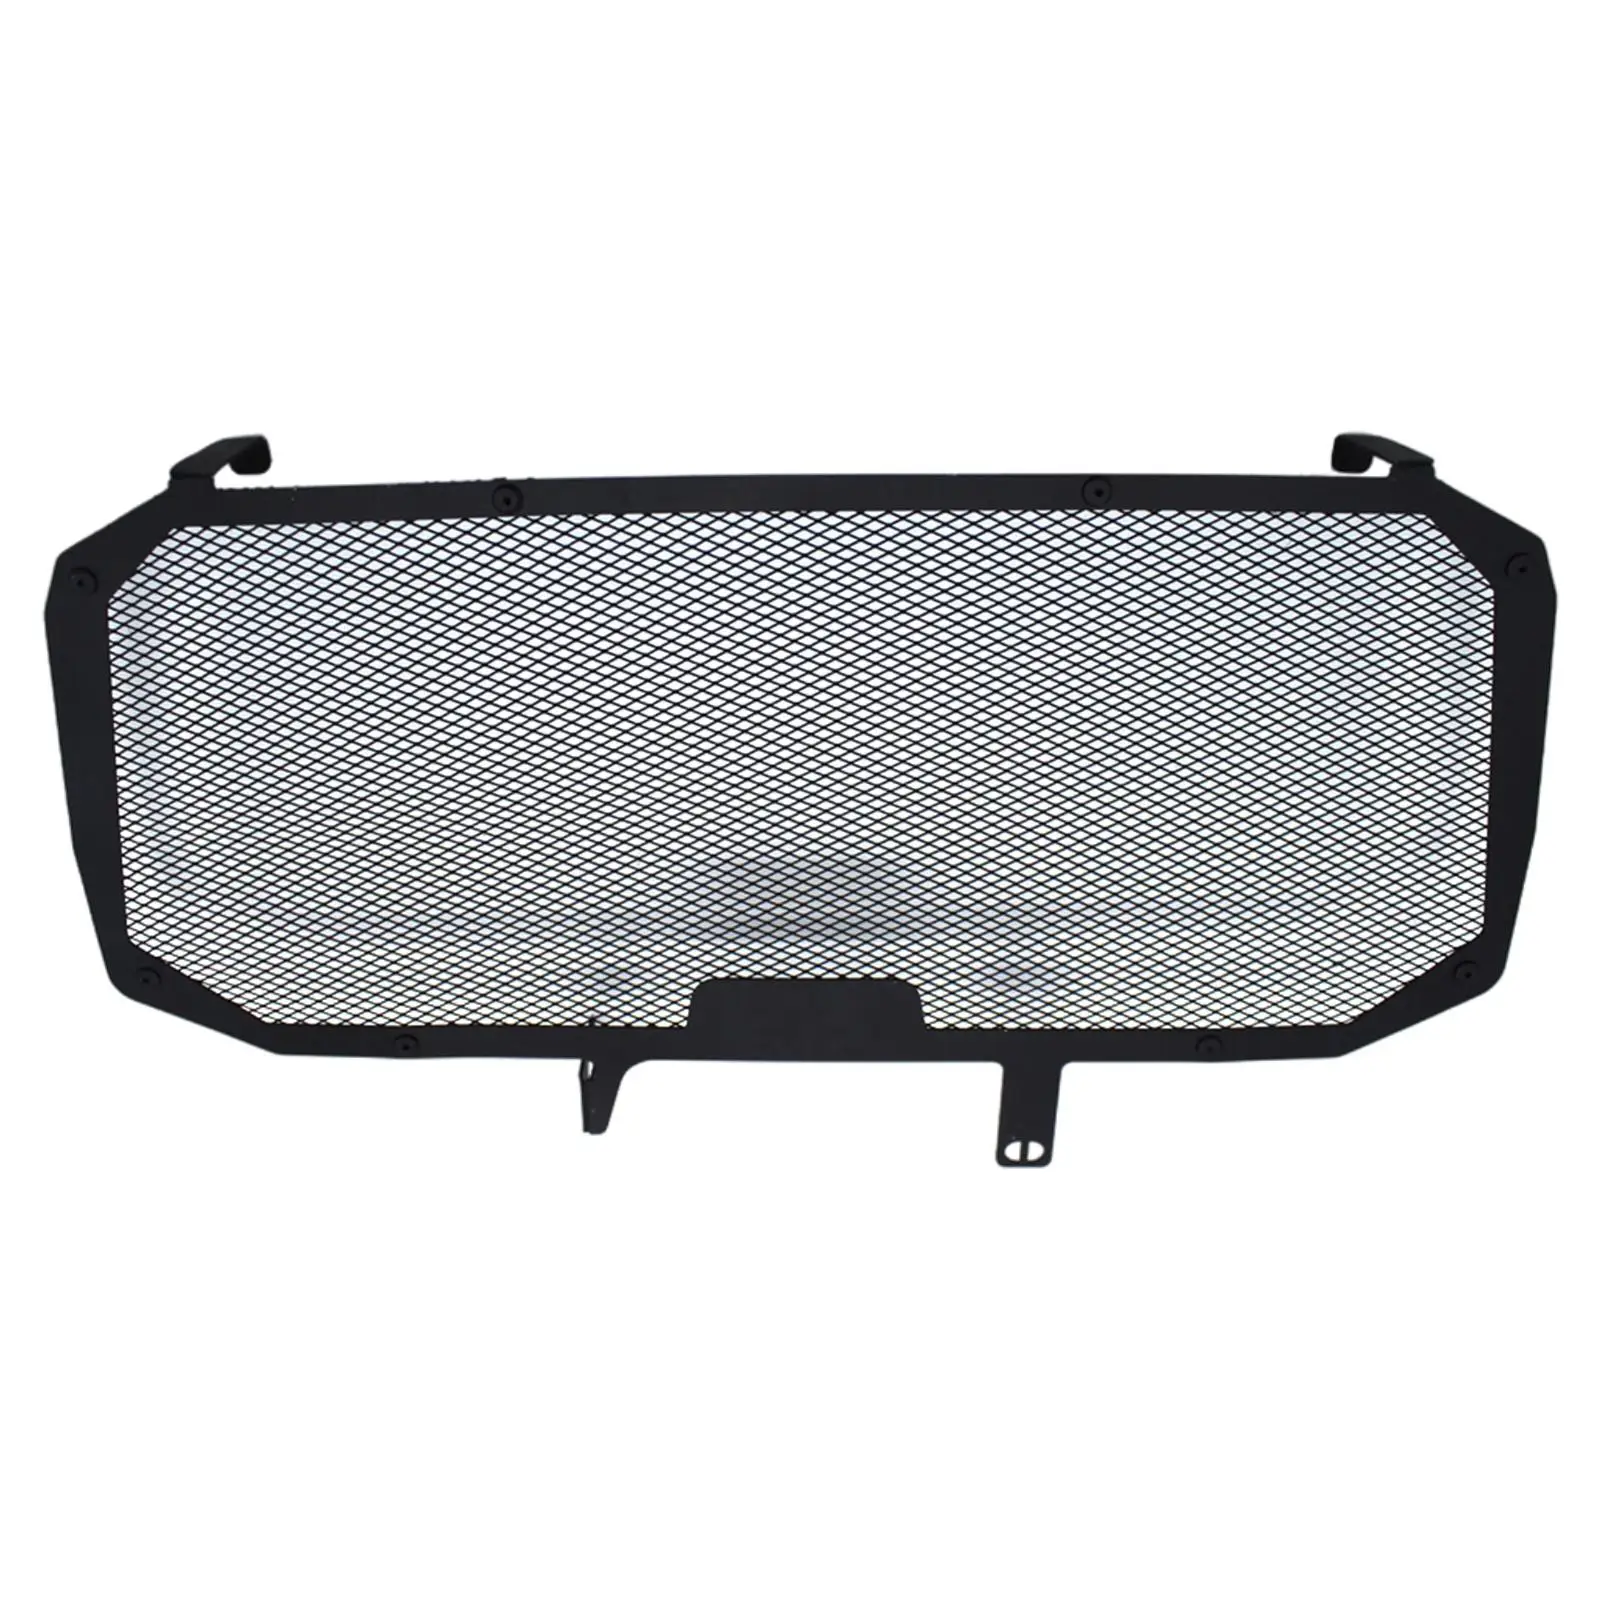 Water Grille Cover for NSS750 50 2020 2021, Durable